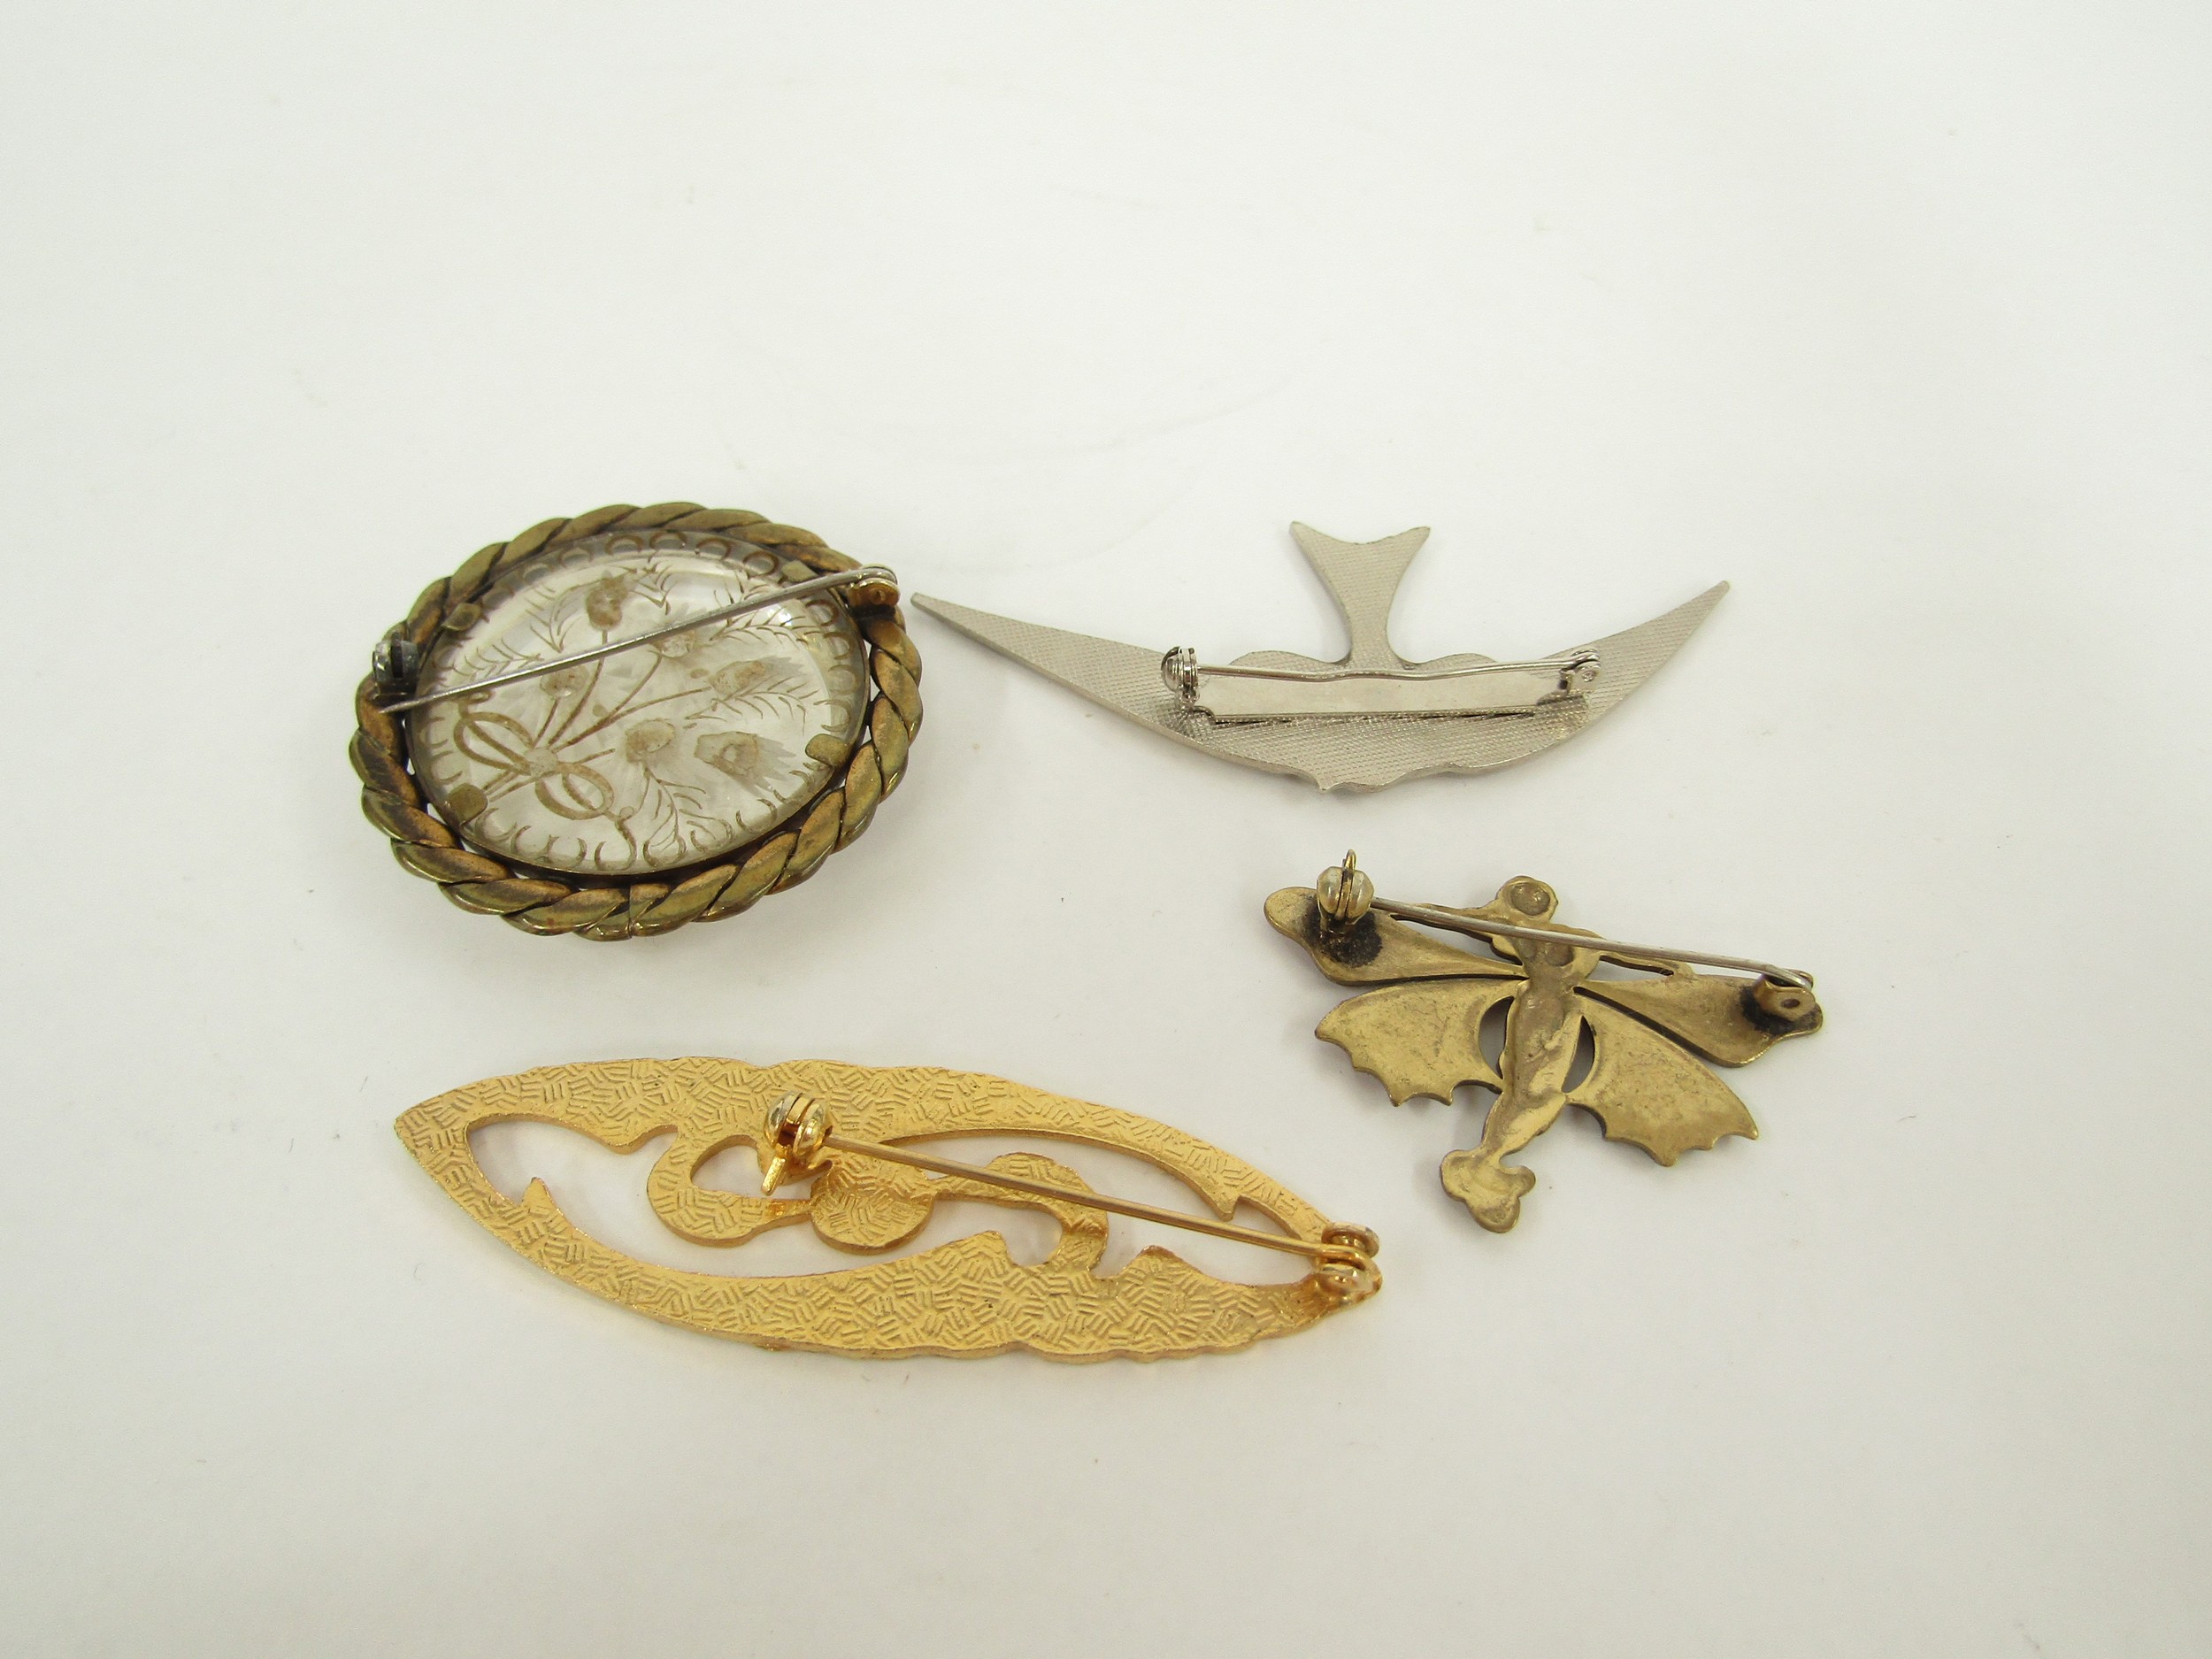 Four decorative brooches including fairy, swallow, flamingo and floral - Image 2 of 2